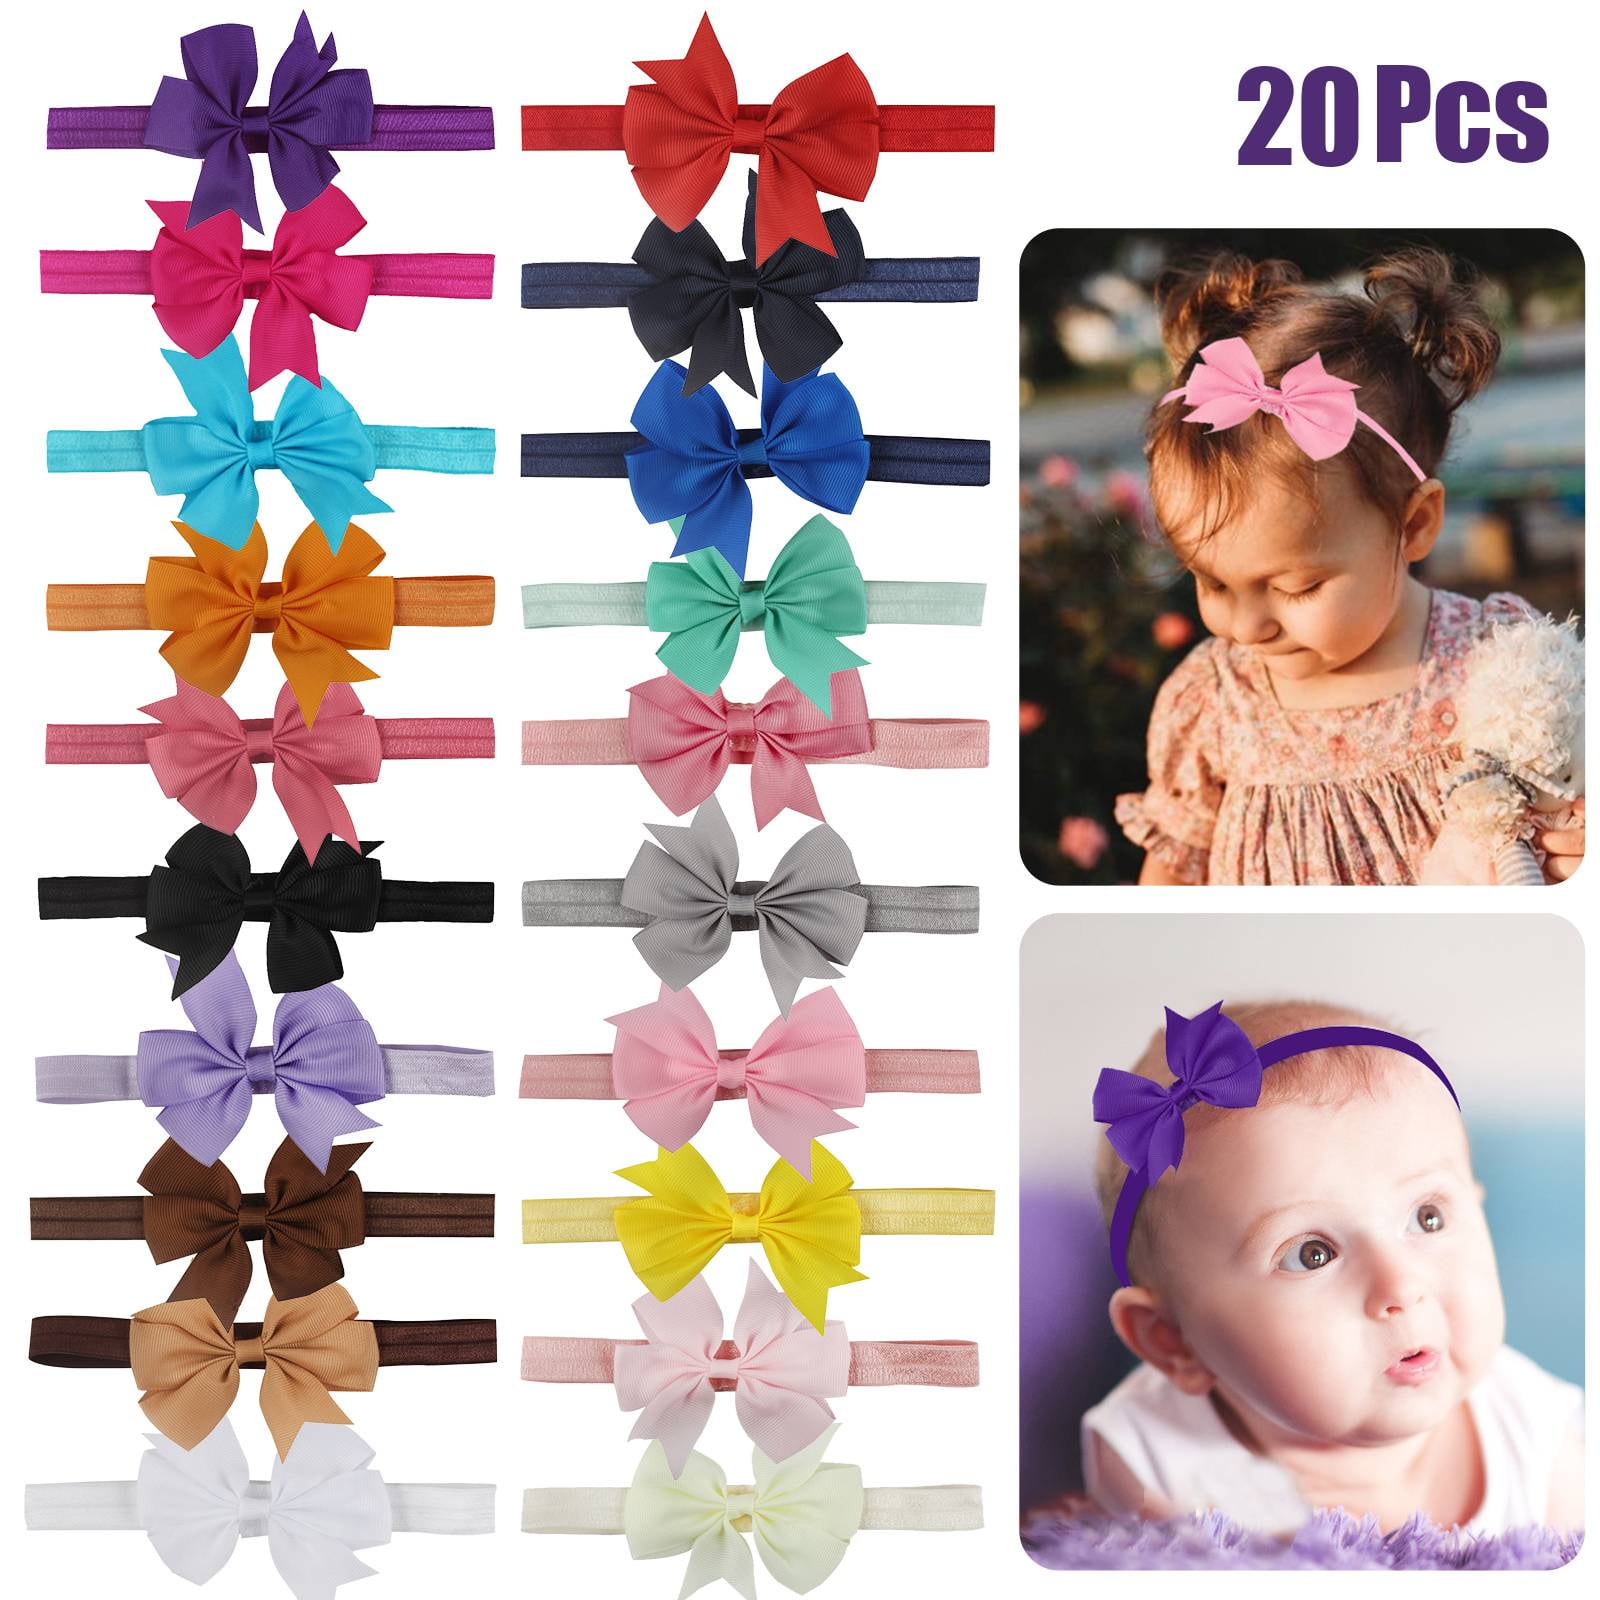 Baby Hair Bands Buy Baby Hair Bands Online At Best Prices In India | 12pcs  Baby Headbands Bow Hairbands Handmade Hair Accessories For Newborn Infant |  